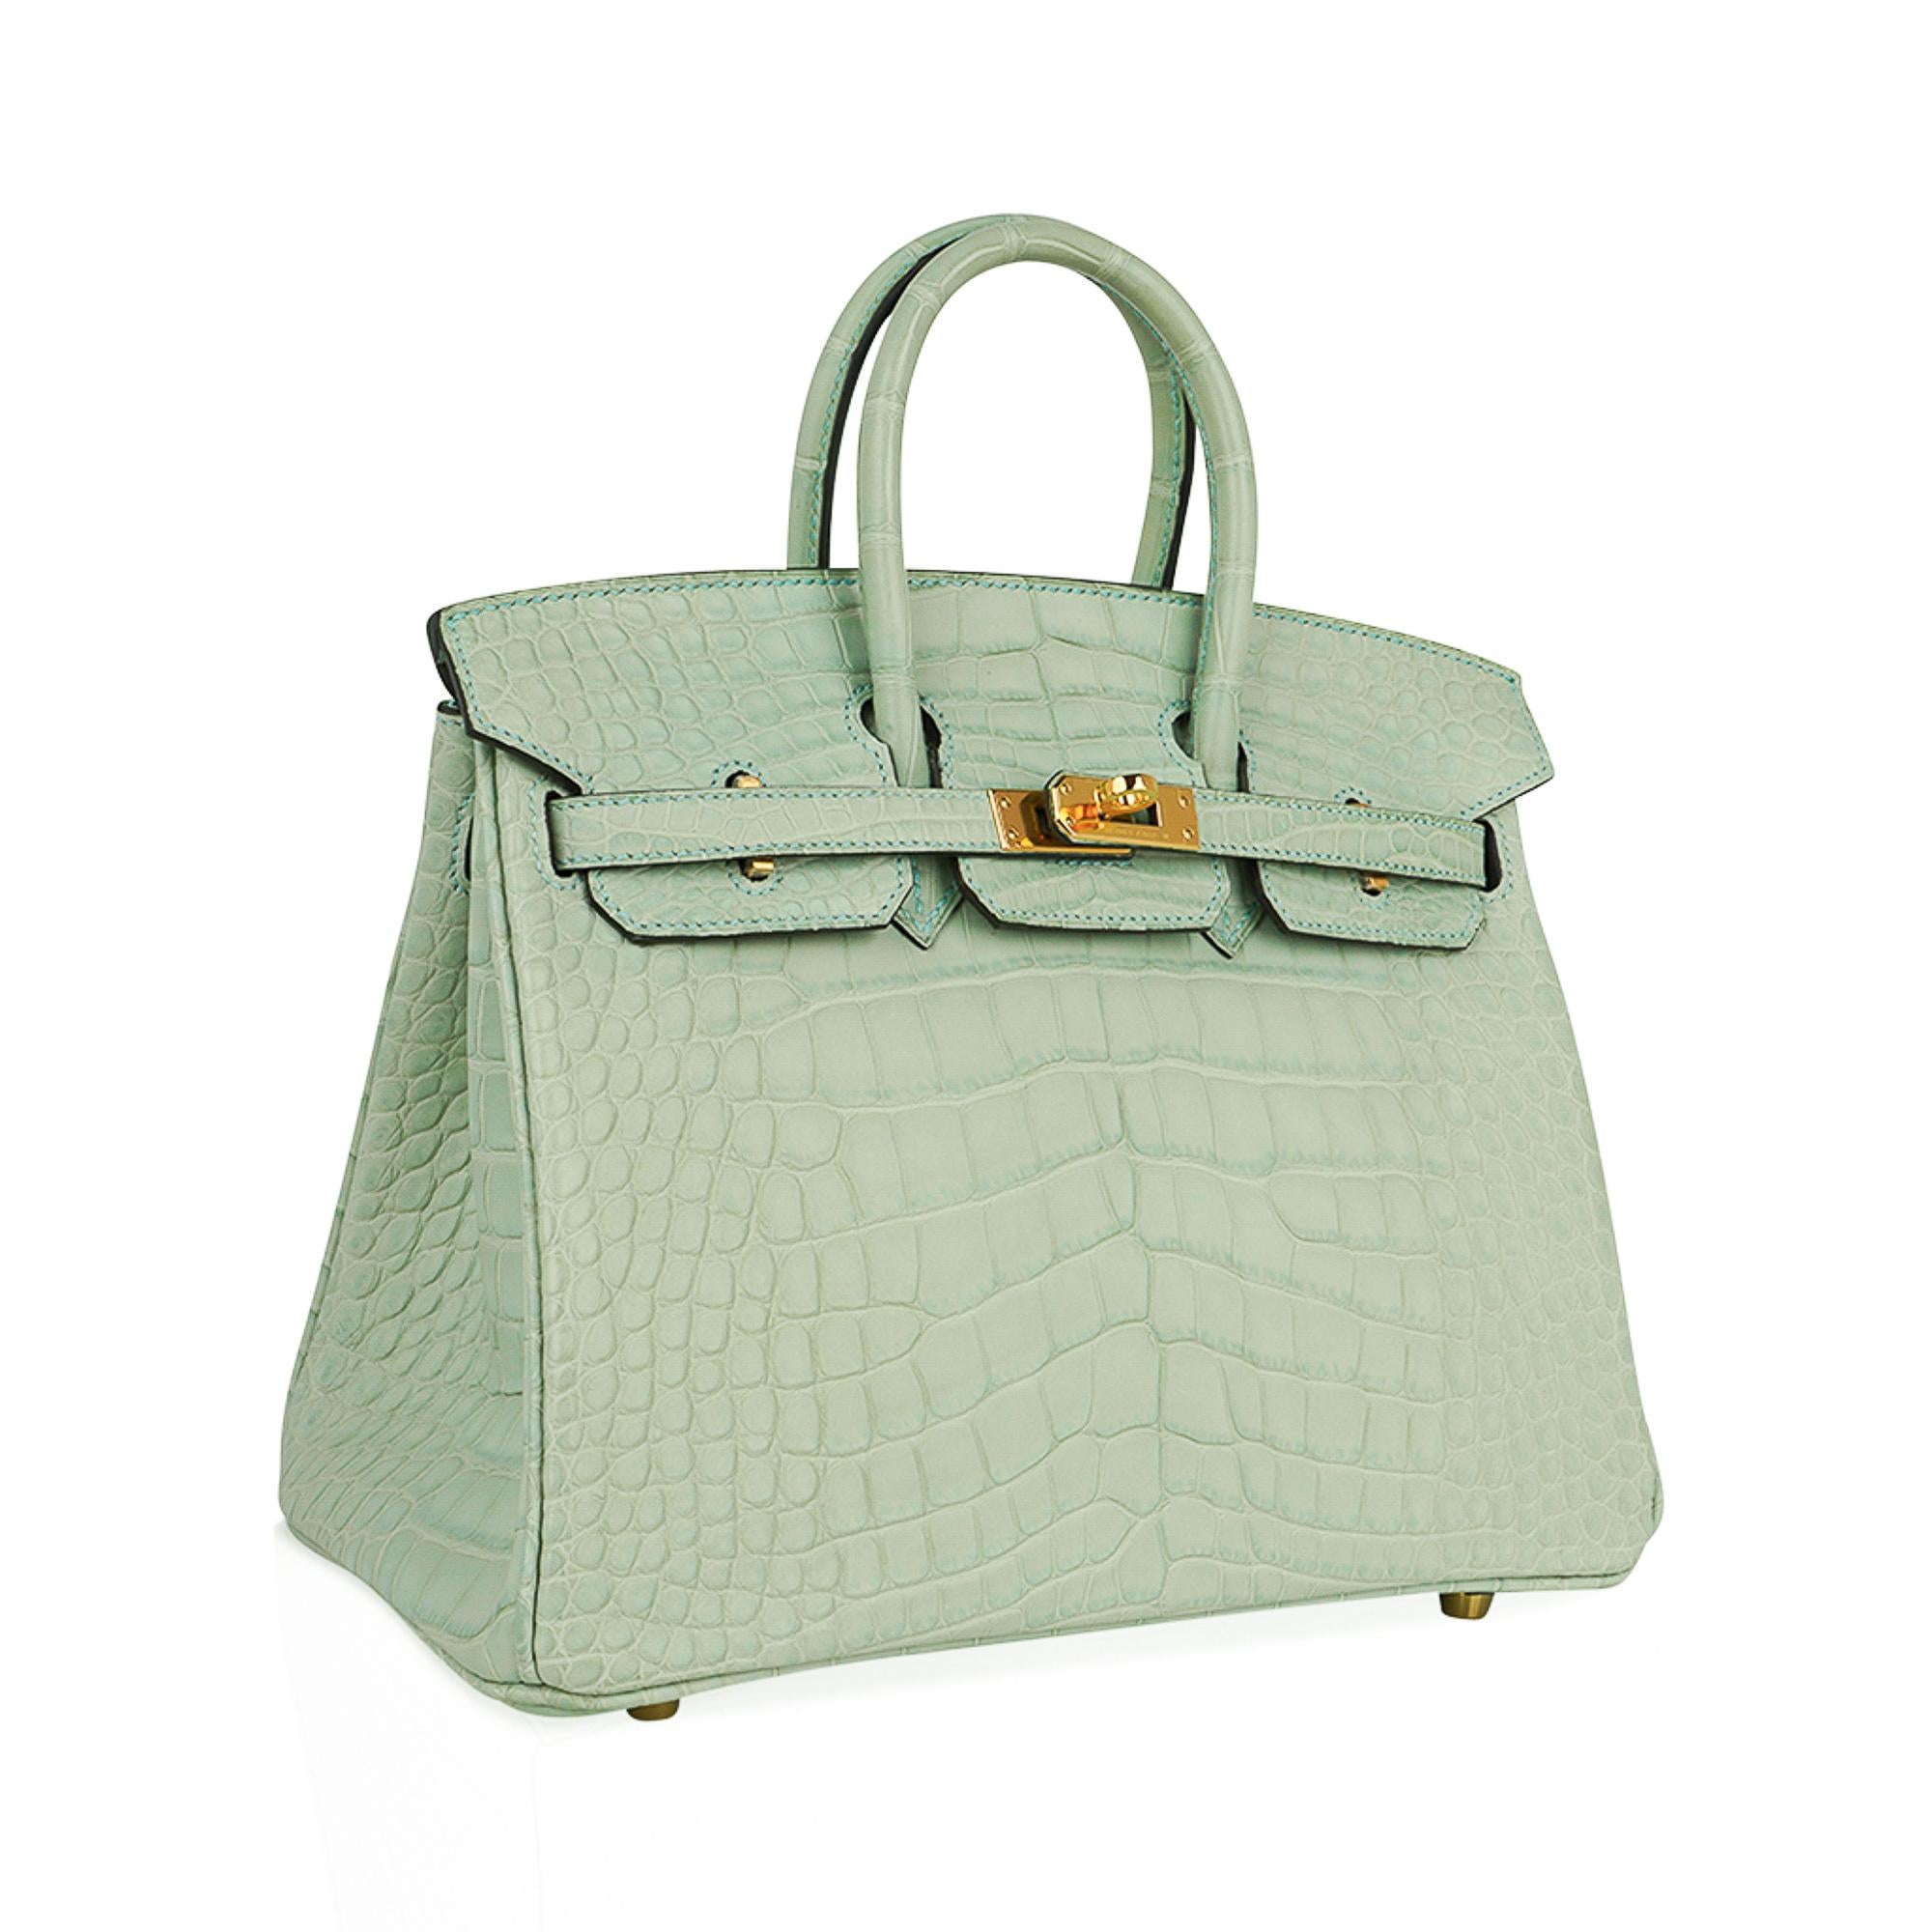 Mightychic offers an Hermes Birkin 25 Bag in rare Vert D'Eau is nothing less than translucent Caribbean water.
Breathtakingly beautiful this limited edition colour Hermes Birkin bag is a testament to the Hermes World of Colour. 
Matte Alligator